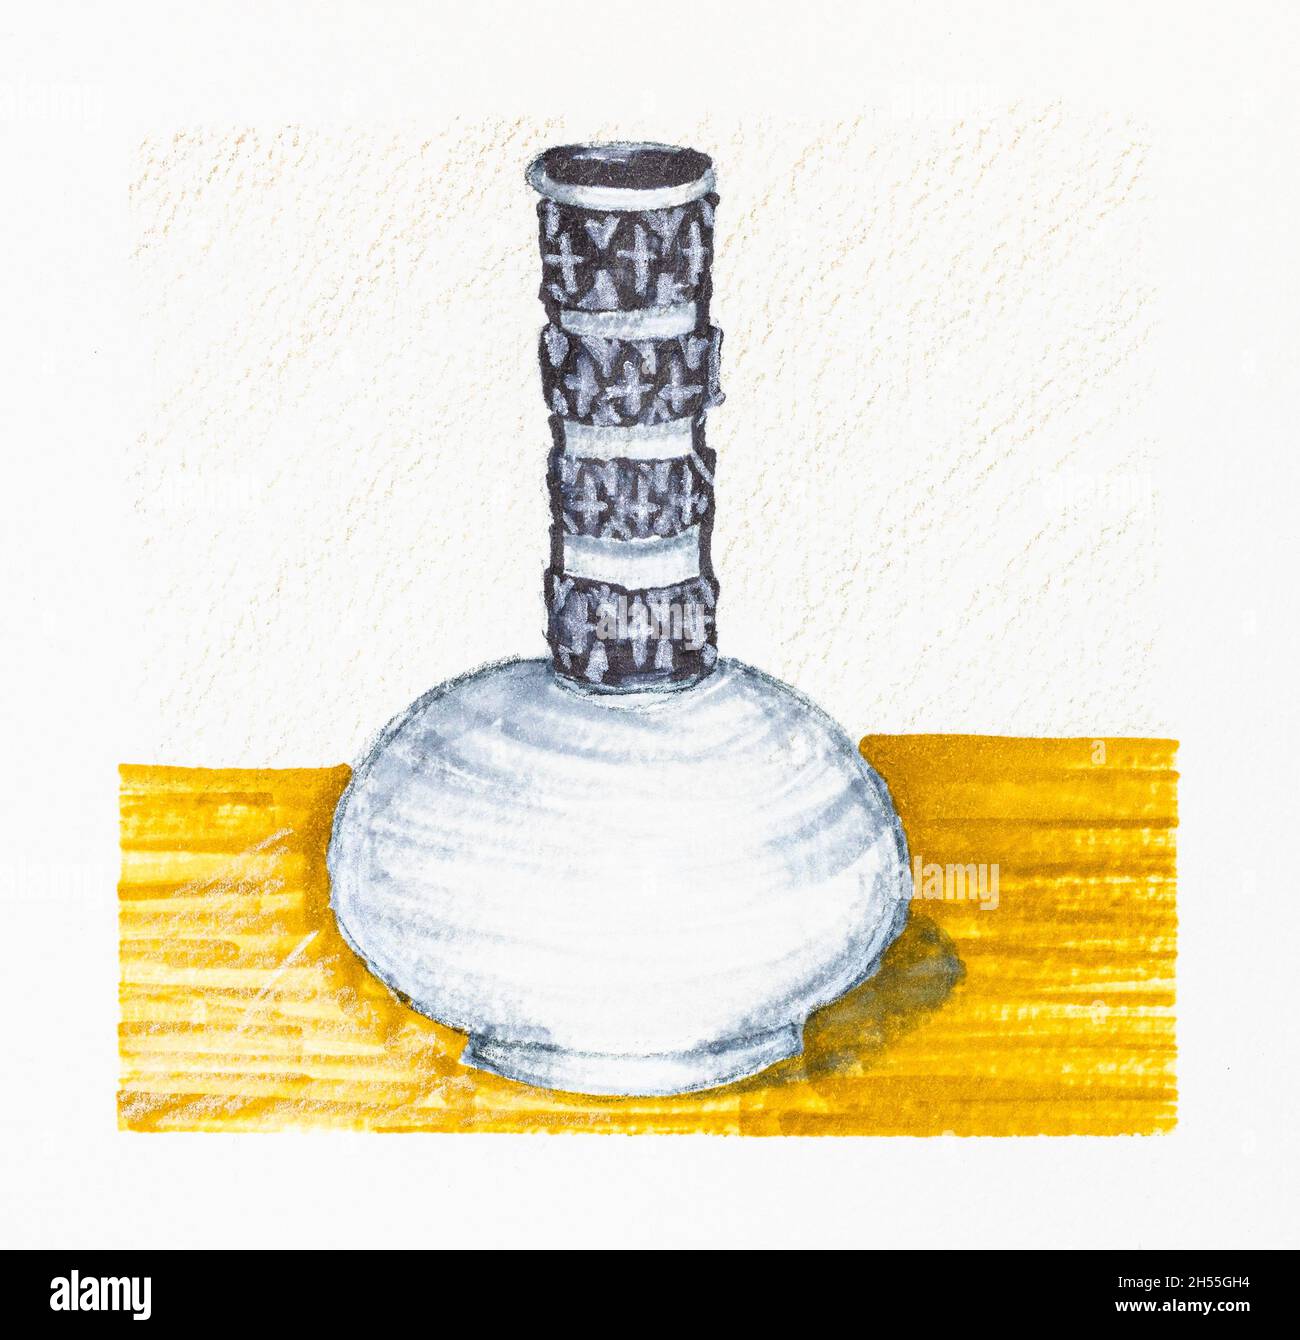 sketch of old empty norwegian pewter vase hand-drawn with markers and color pencils on white textured paper Stock Photo